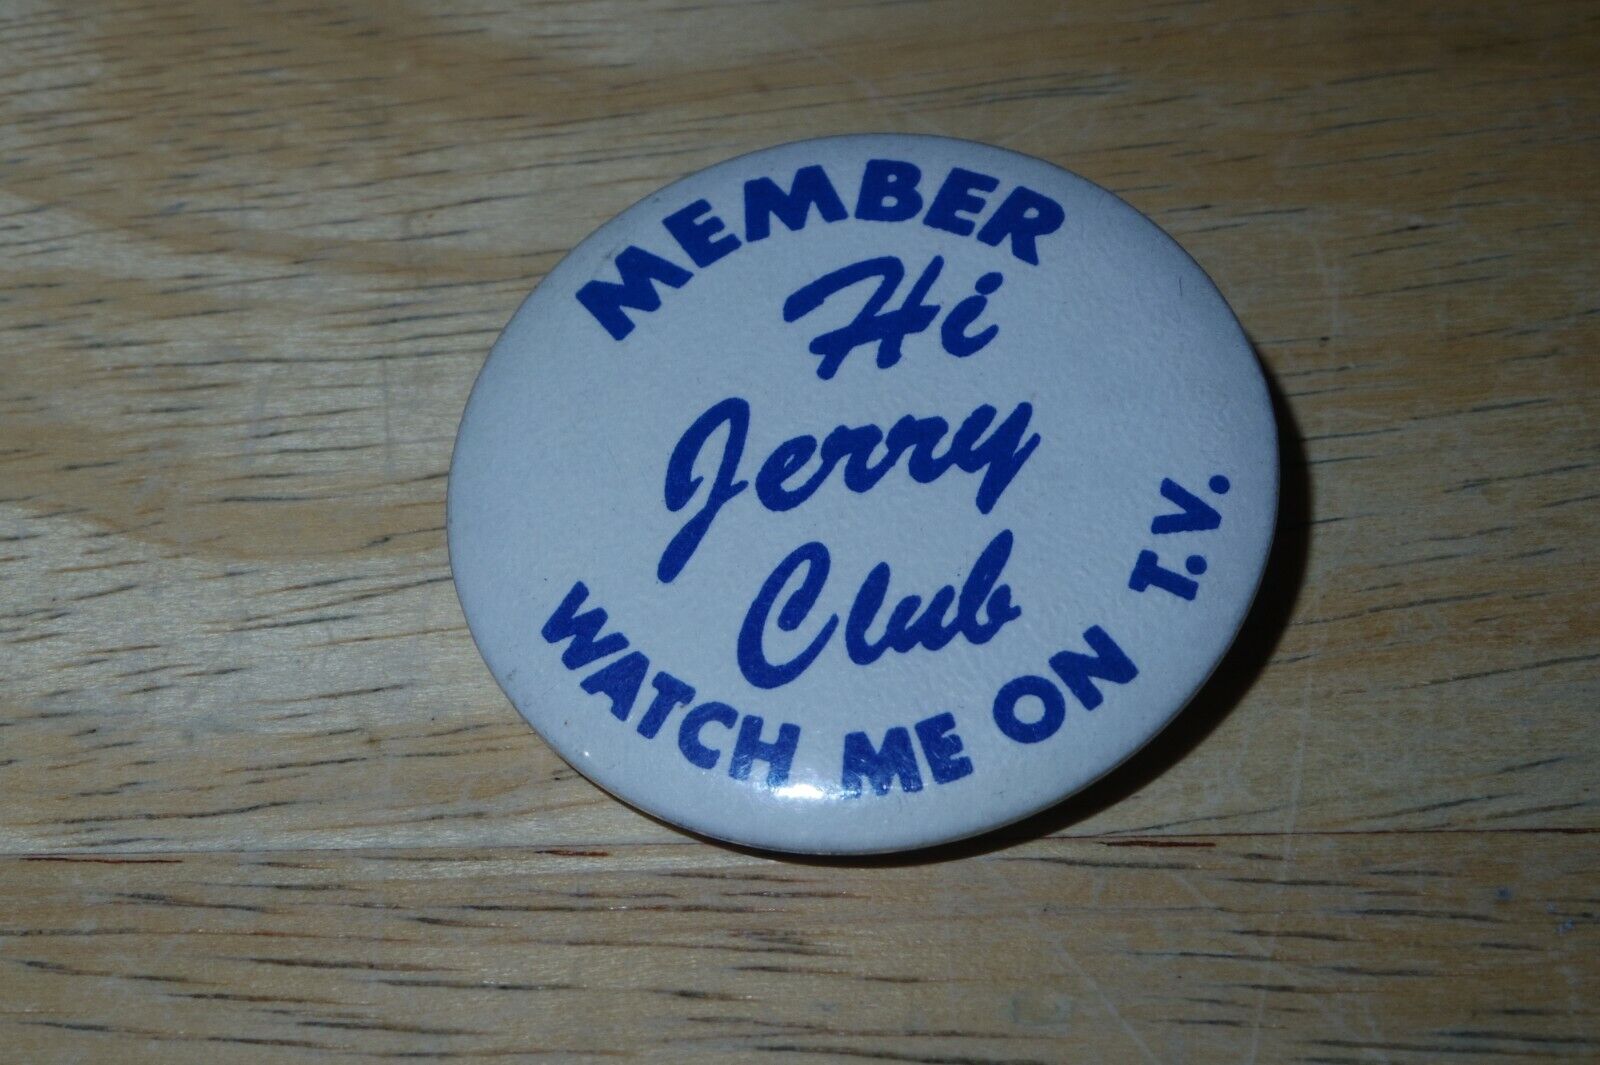 Vintage Member Jerry Club Watch Me on T.V. Pin Button Pinback Blue White 1 3/4\